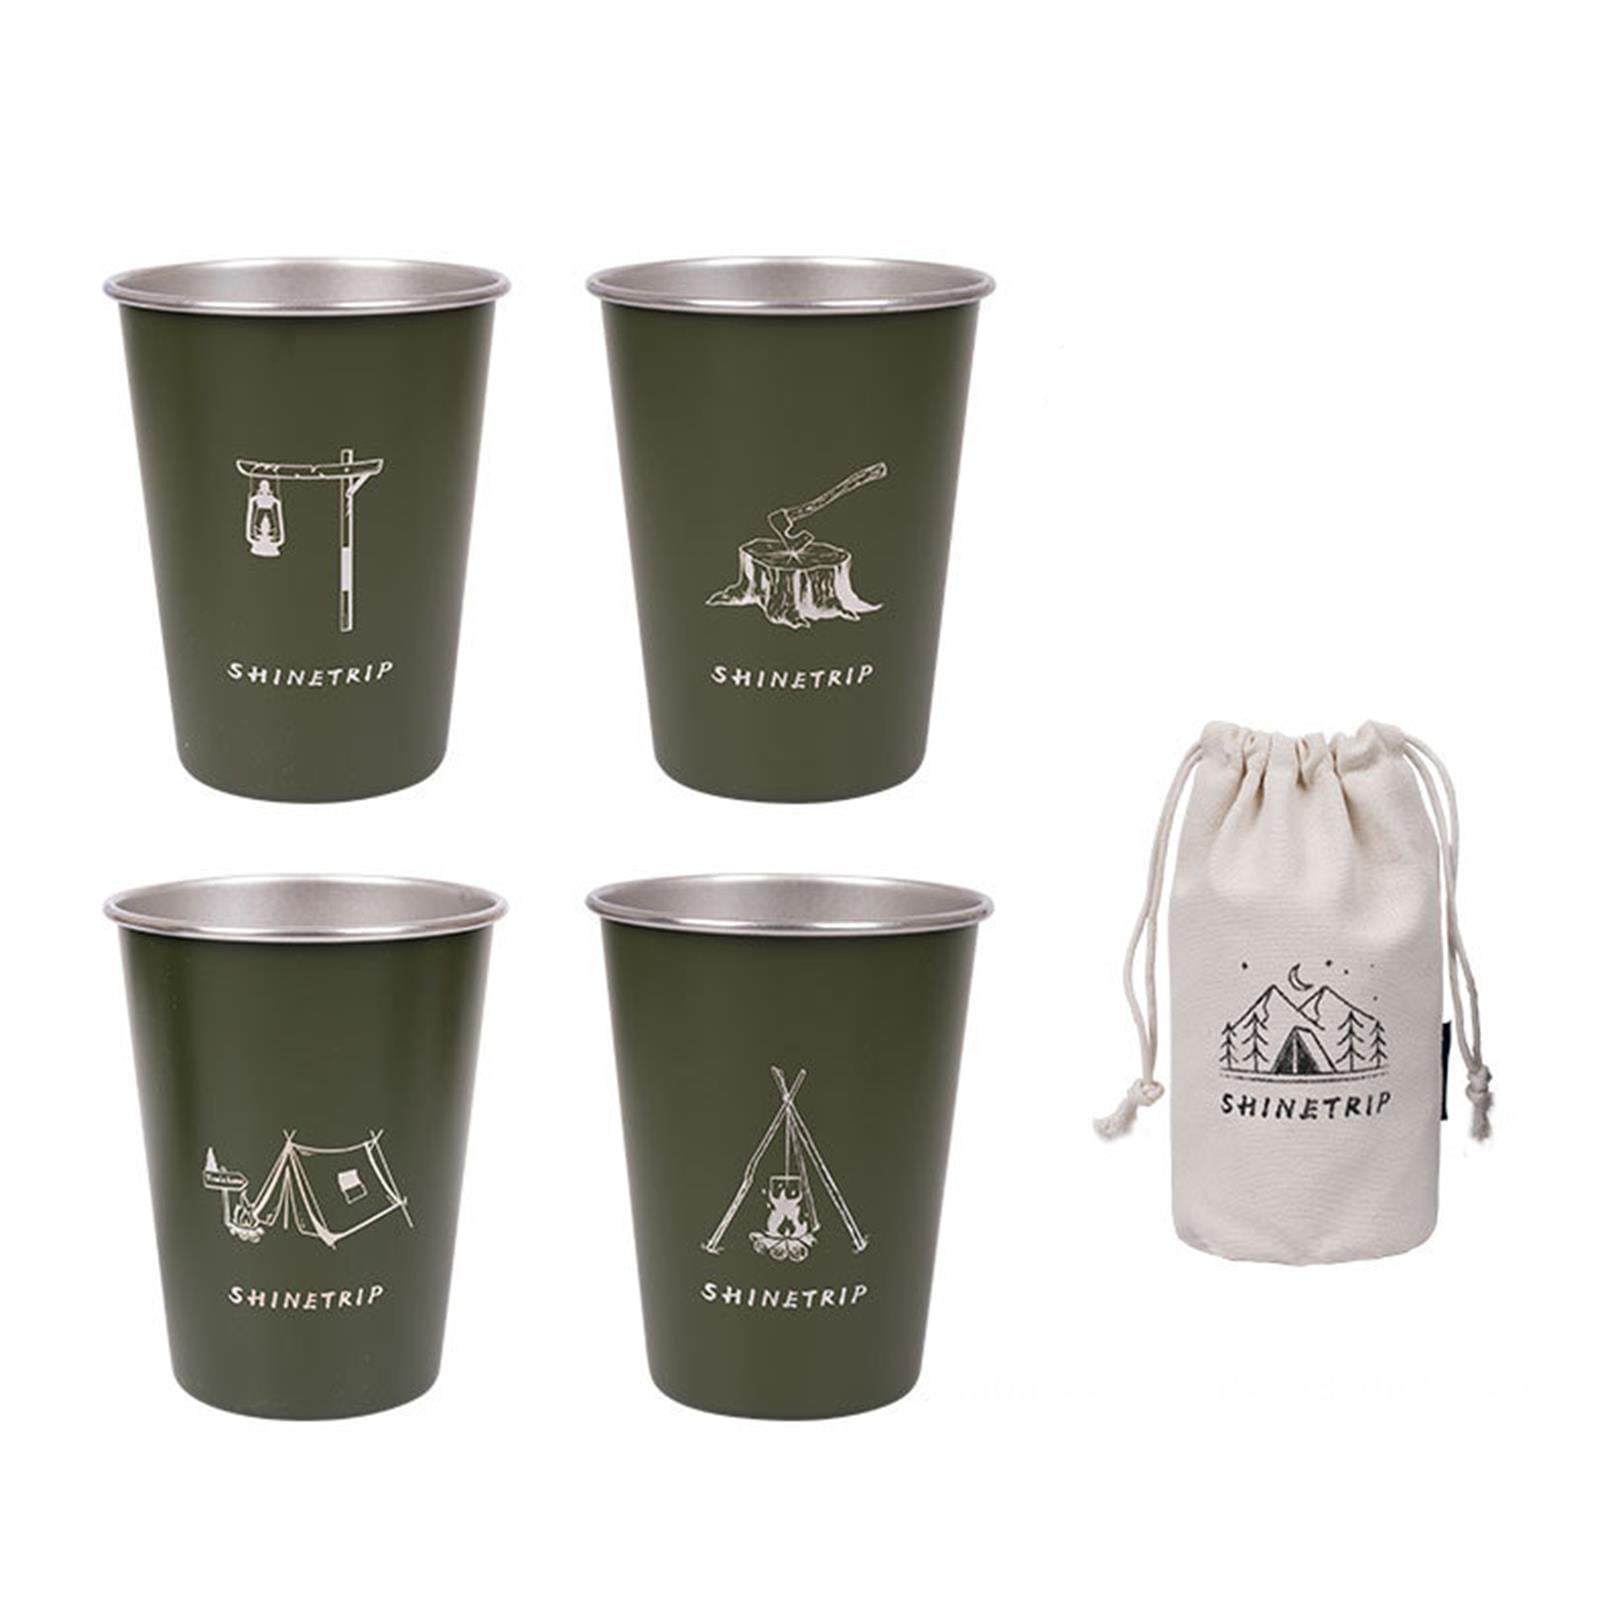 4 x GREEN POLY PLASTIC UNBREAKABLE OUTDOOR CATERING CAMPING CUP OR CADETS MUG 